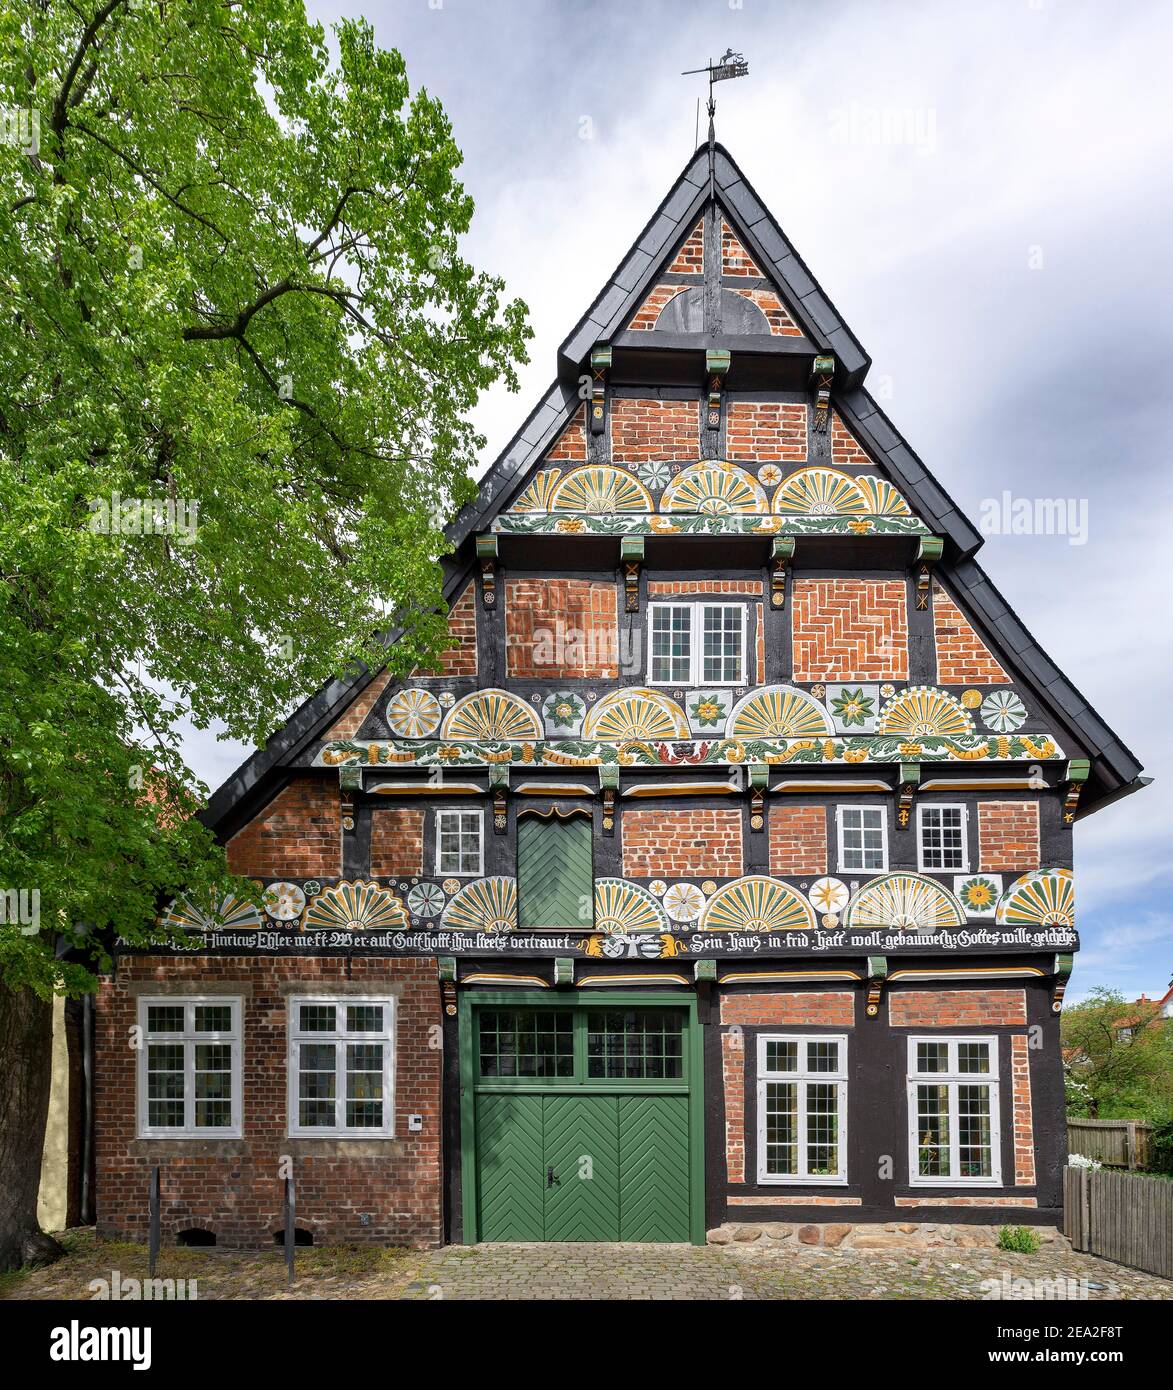 Ackerbuergerhaus, half-timbered house in the style of the Weser Renaissance, today gallery and event house, Strukturstrasse, Verden, Lower Saxony Stock Photo